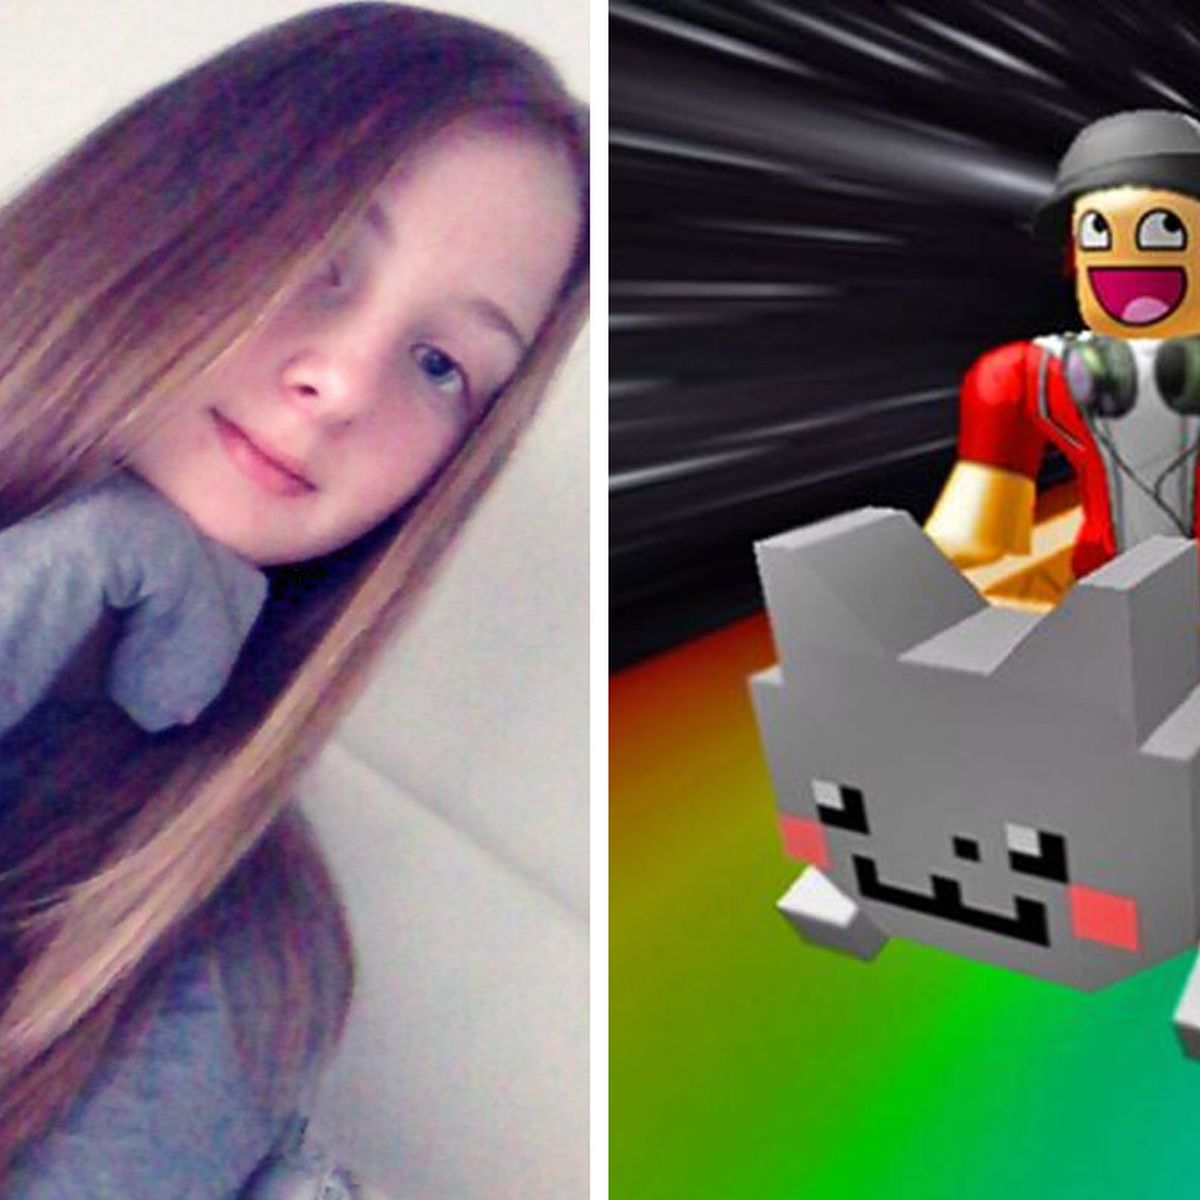 It Made Me Feel Sick Adelaide Girl 12 Targeted By Predator On Kids Game Roblox - hoe to play sex games on roblox